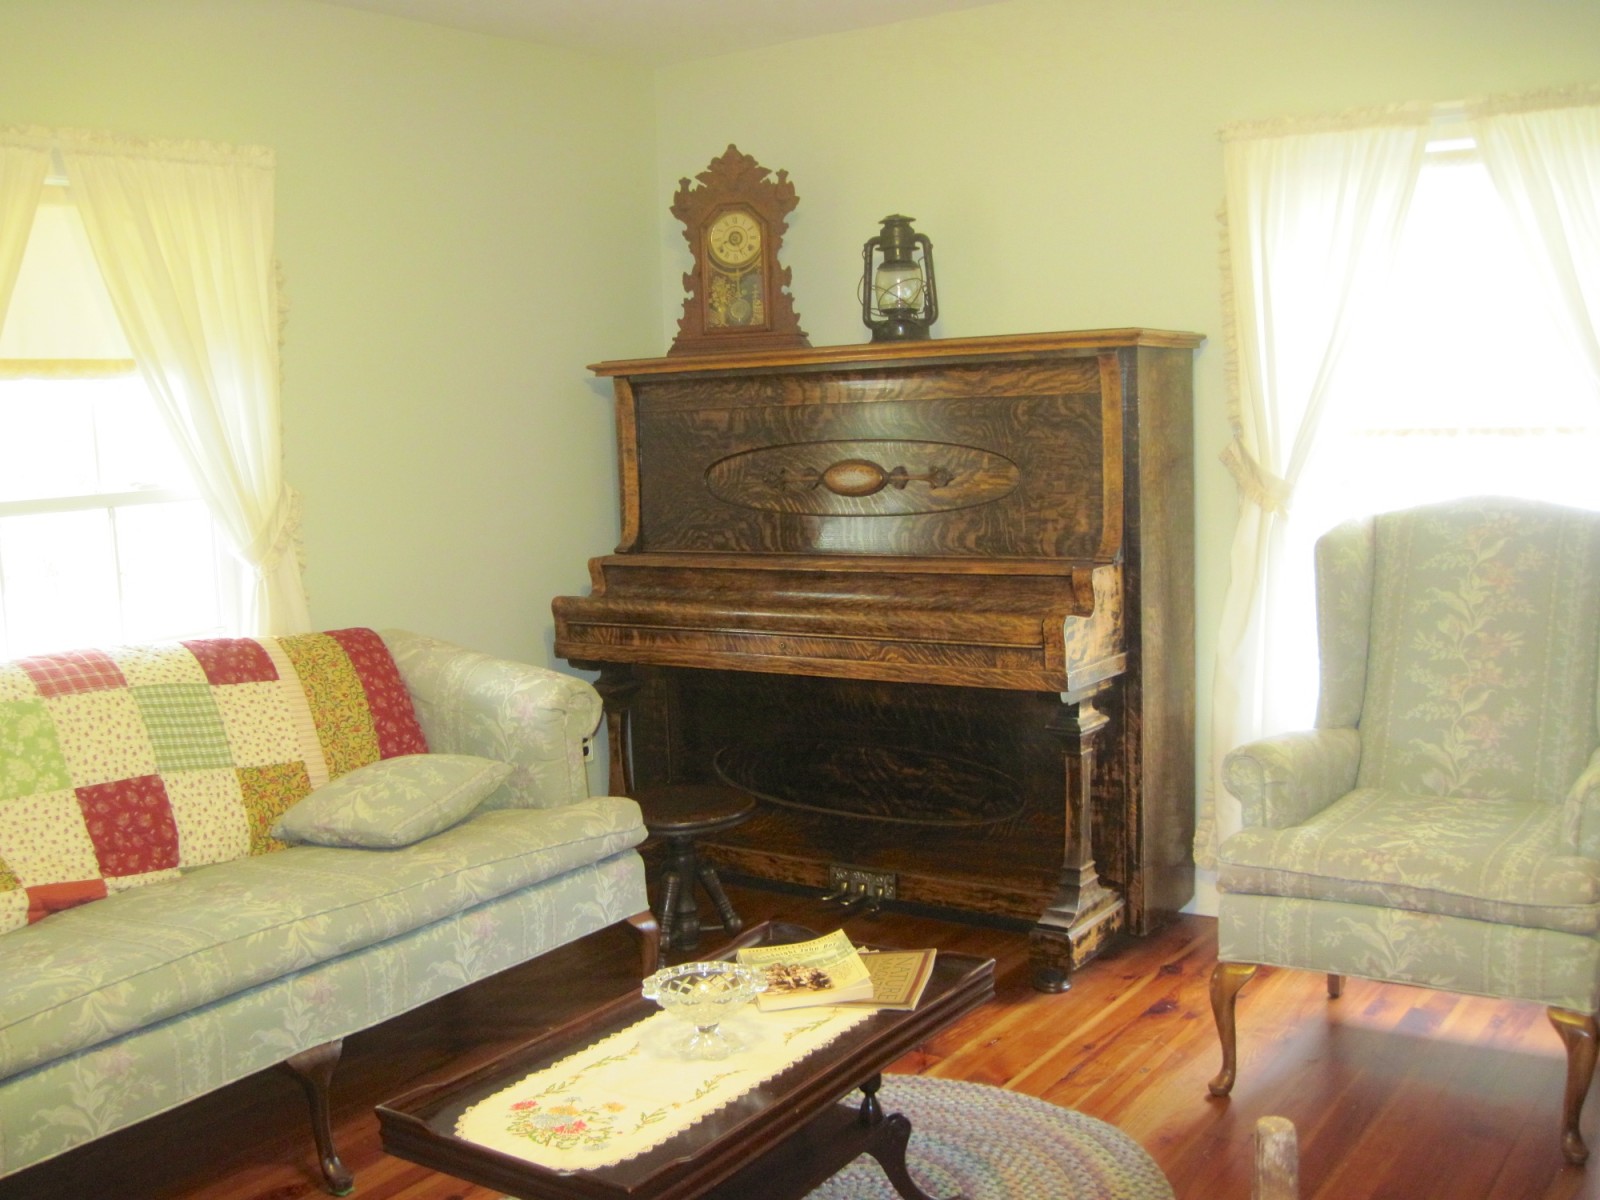 "The Waltons" family room and its piano. (WTOP/Ed Kelleher)